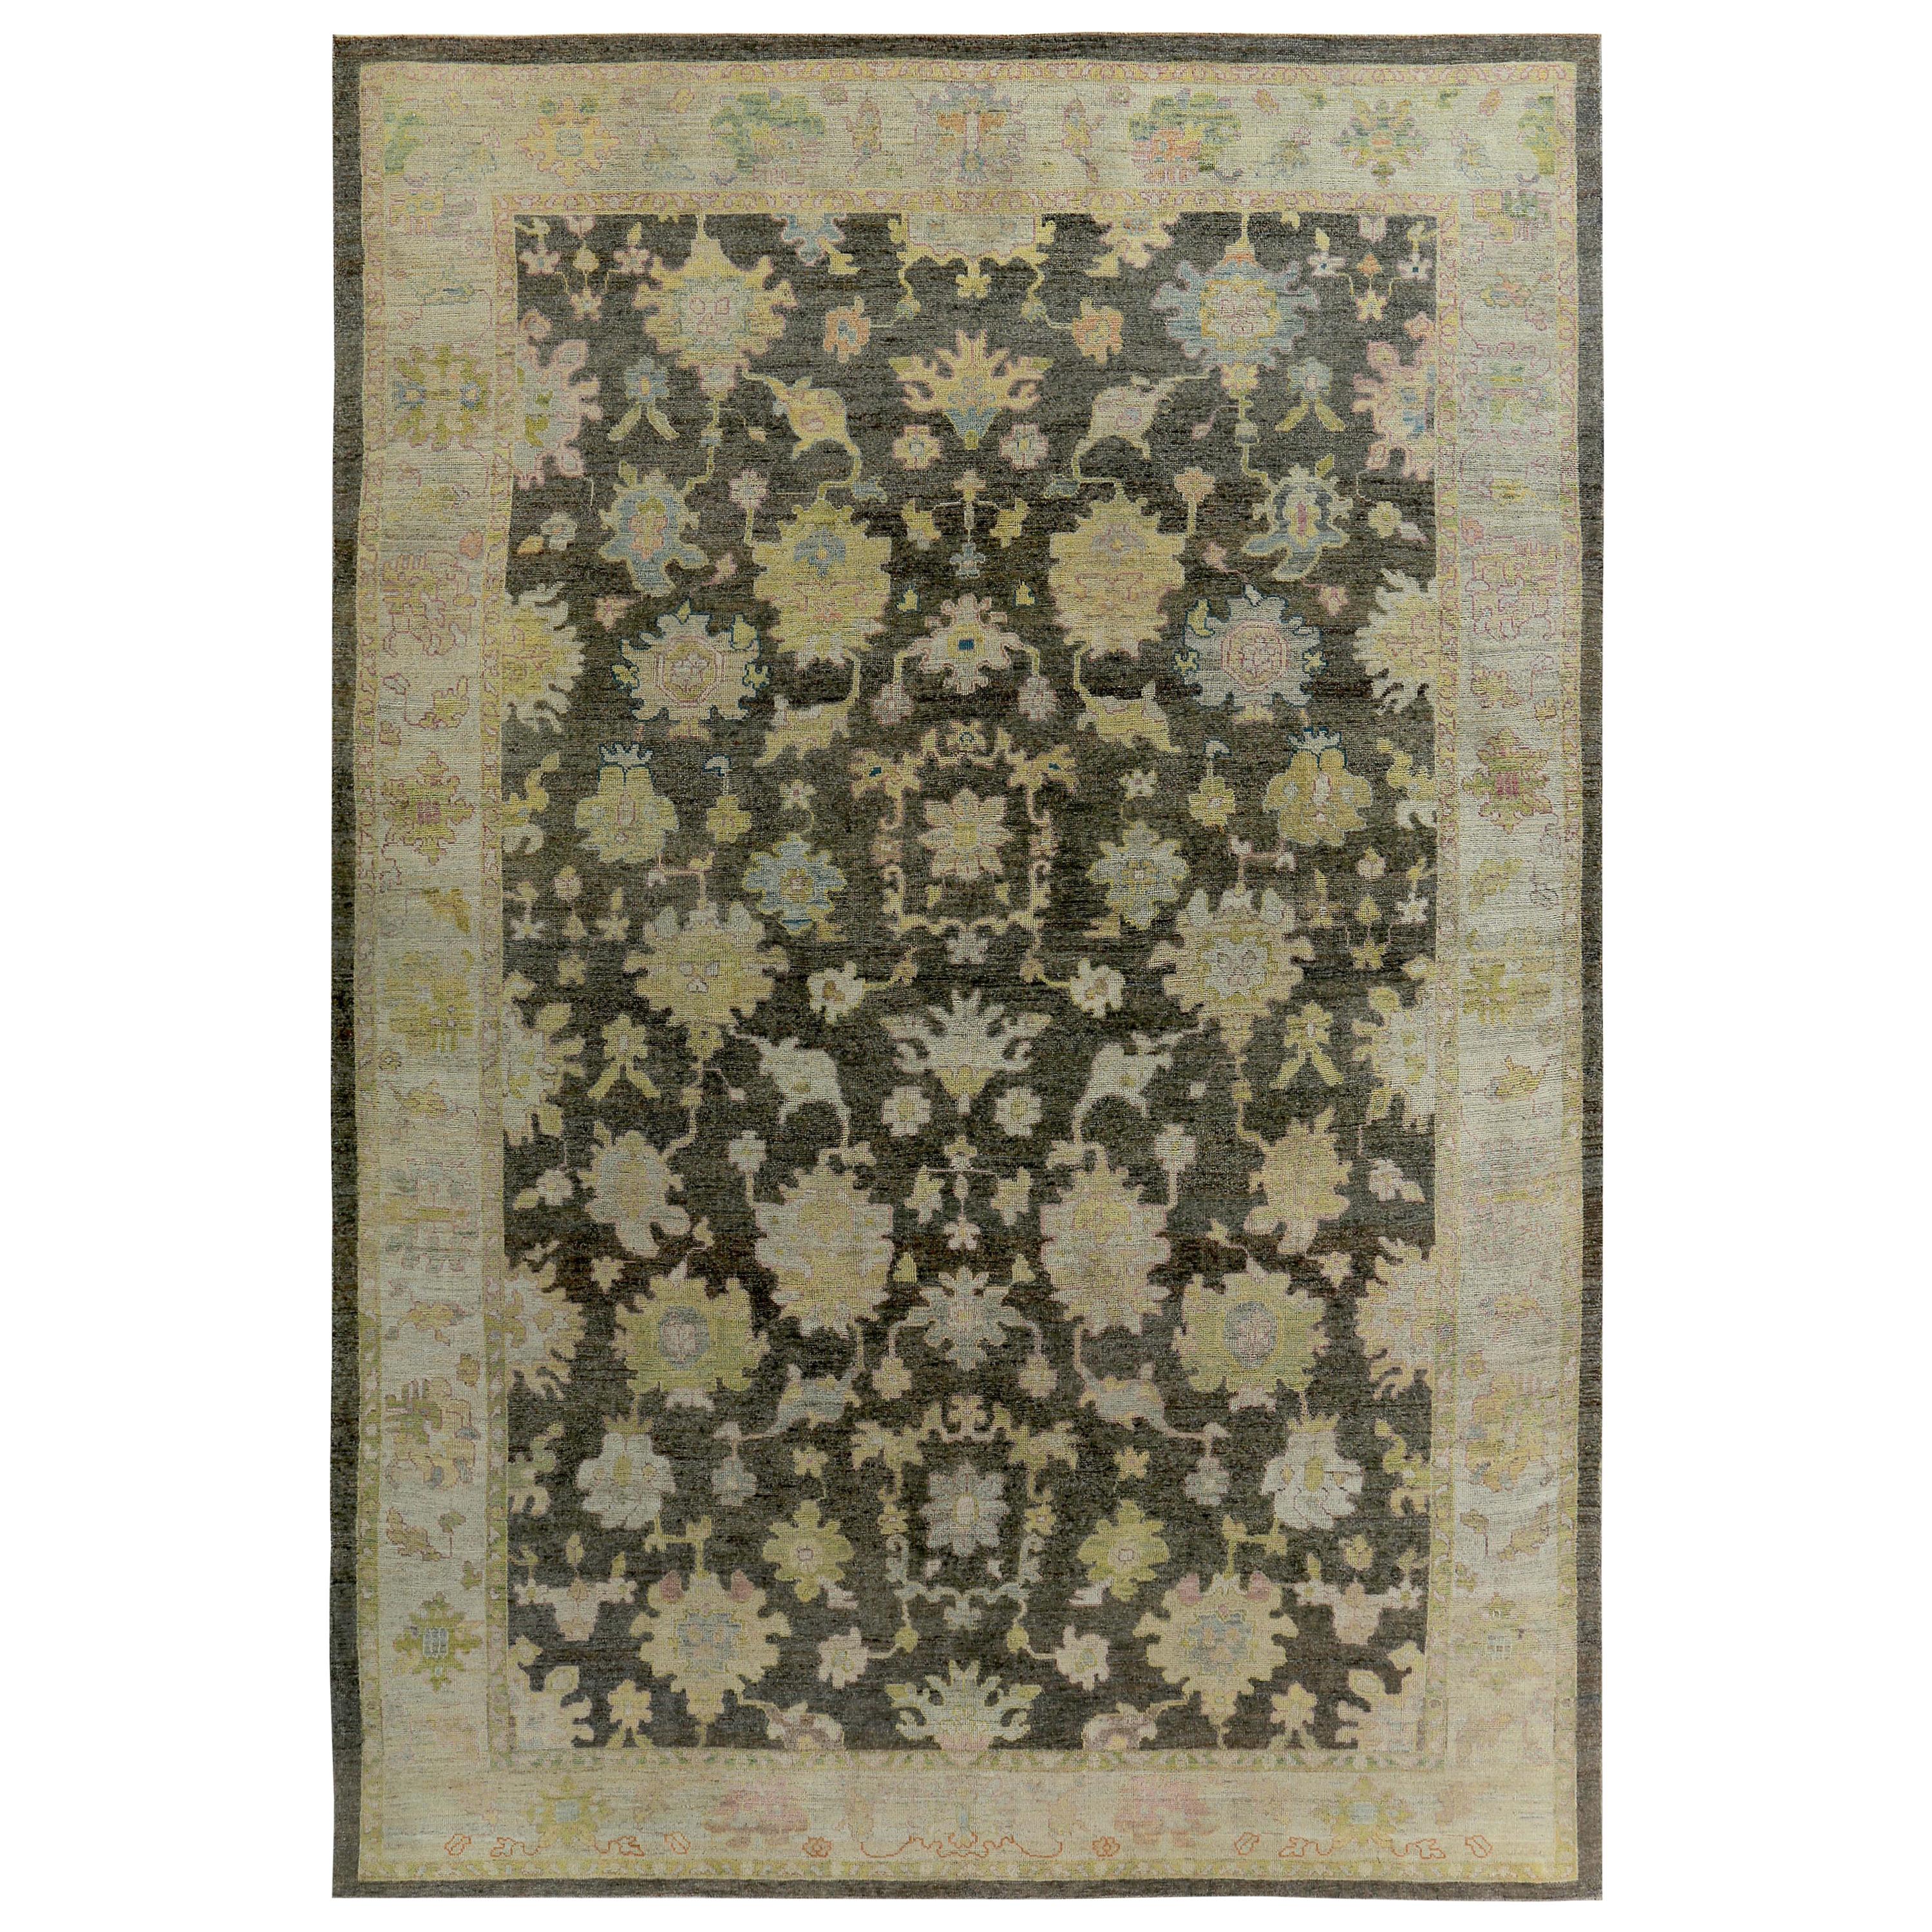 Turkish Oushak Rug with Pink & Gold Floral Details on Ivory & Brown Field